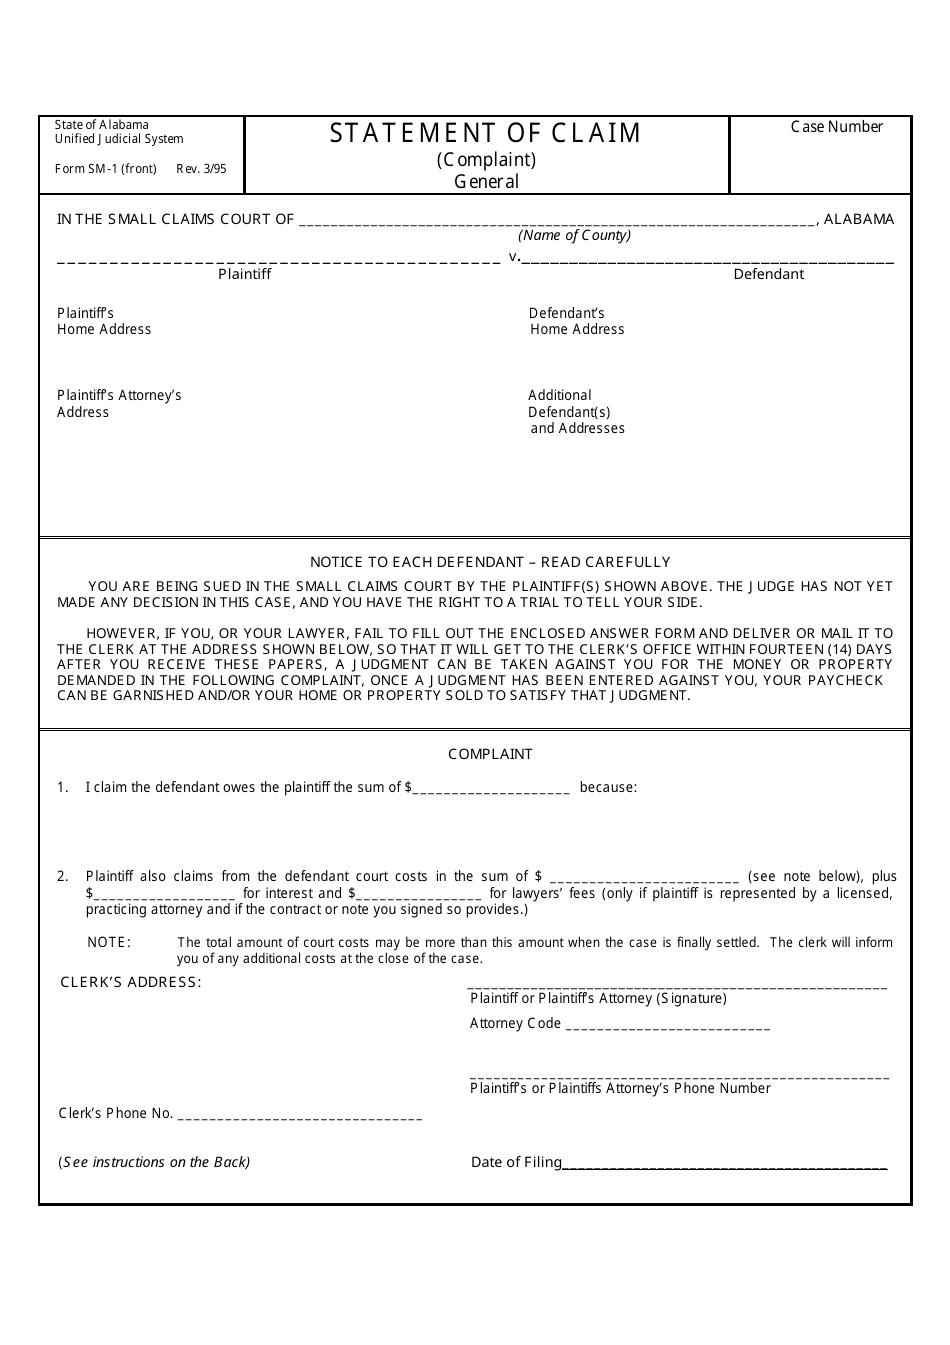 form-sm-1-download-fillable-pdf-or-fill-online-statement-of-claim